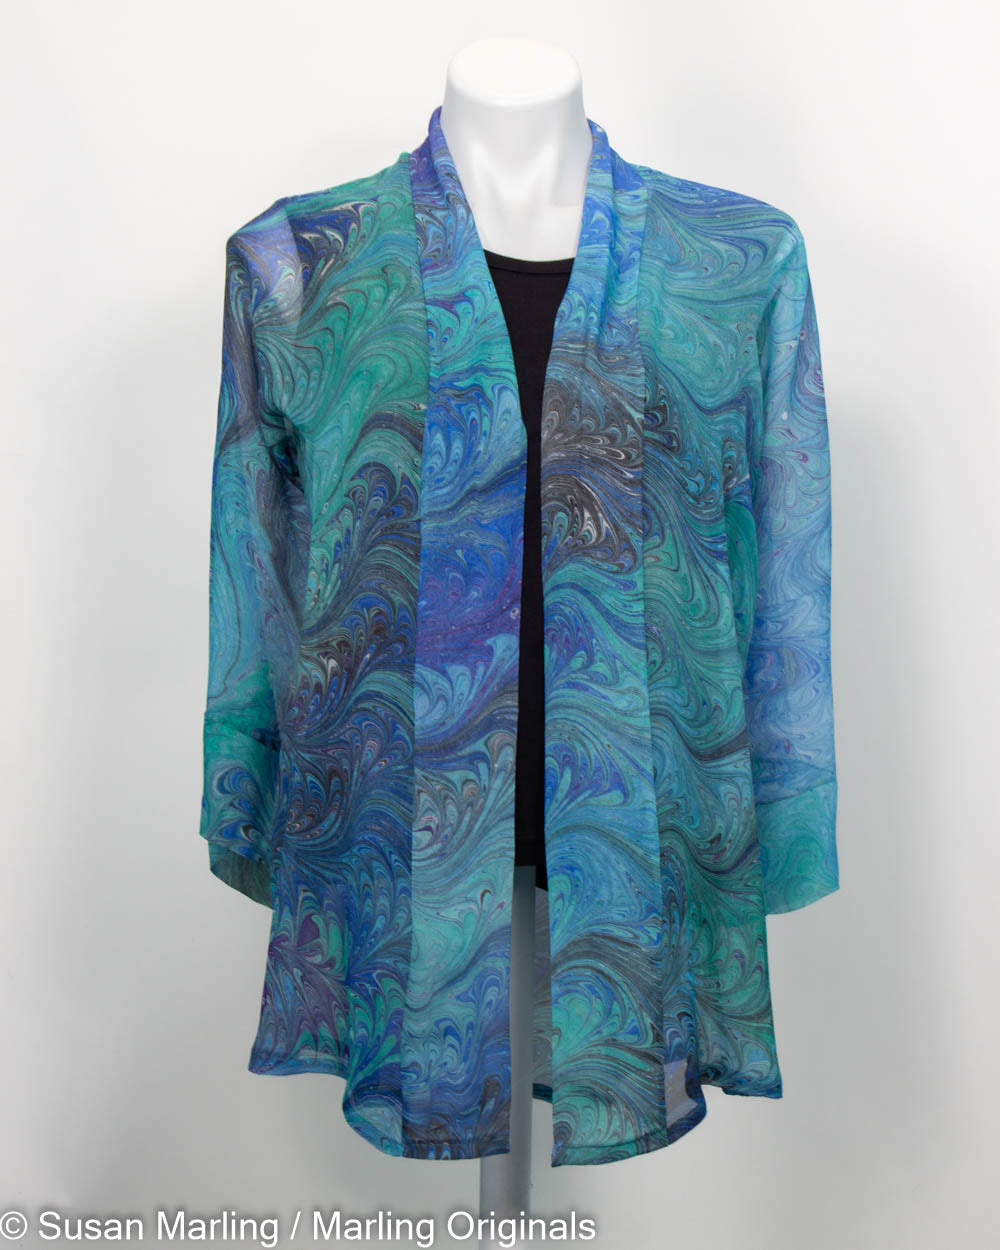 soft aqua, teal and blue marbled in a feathered pattern made into a sheer silk kimono jacket